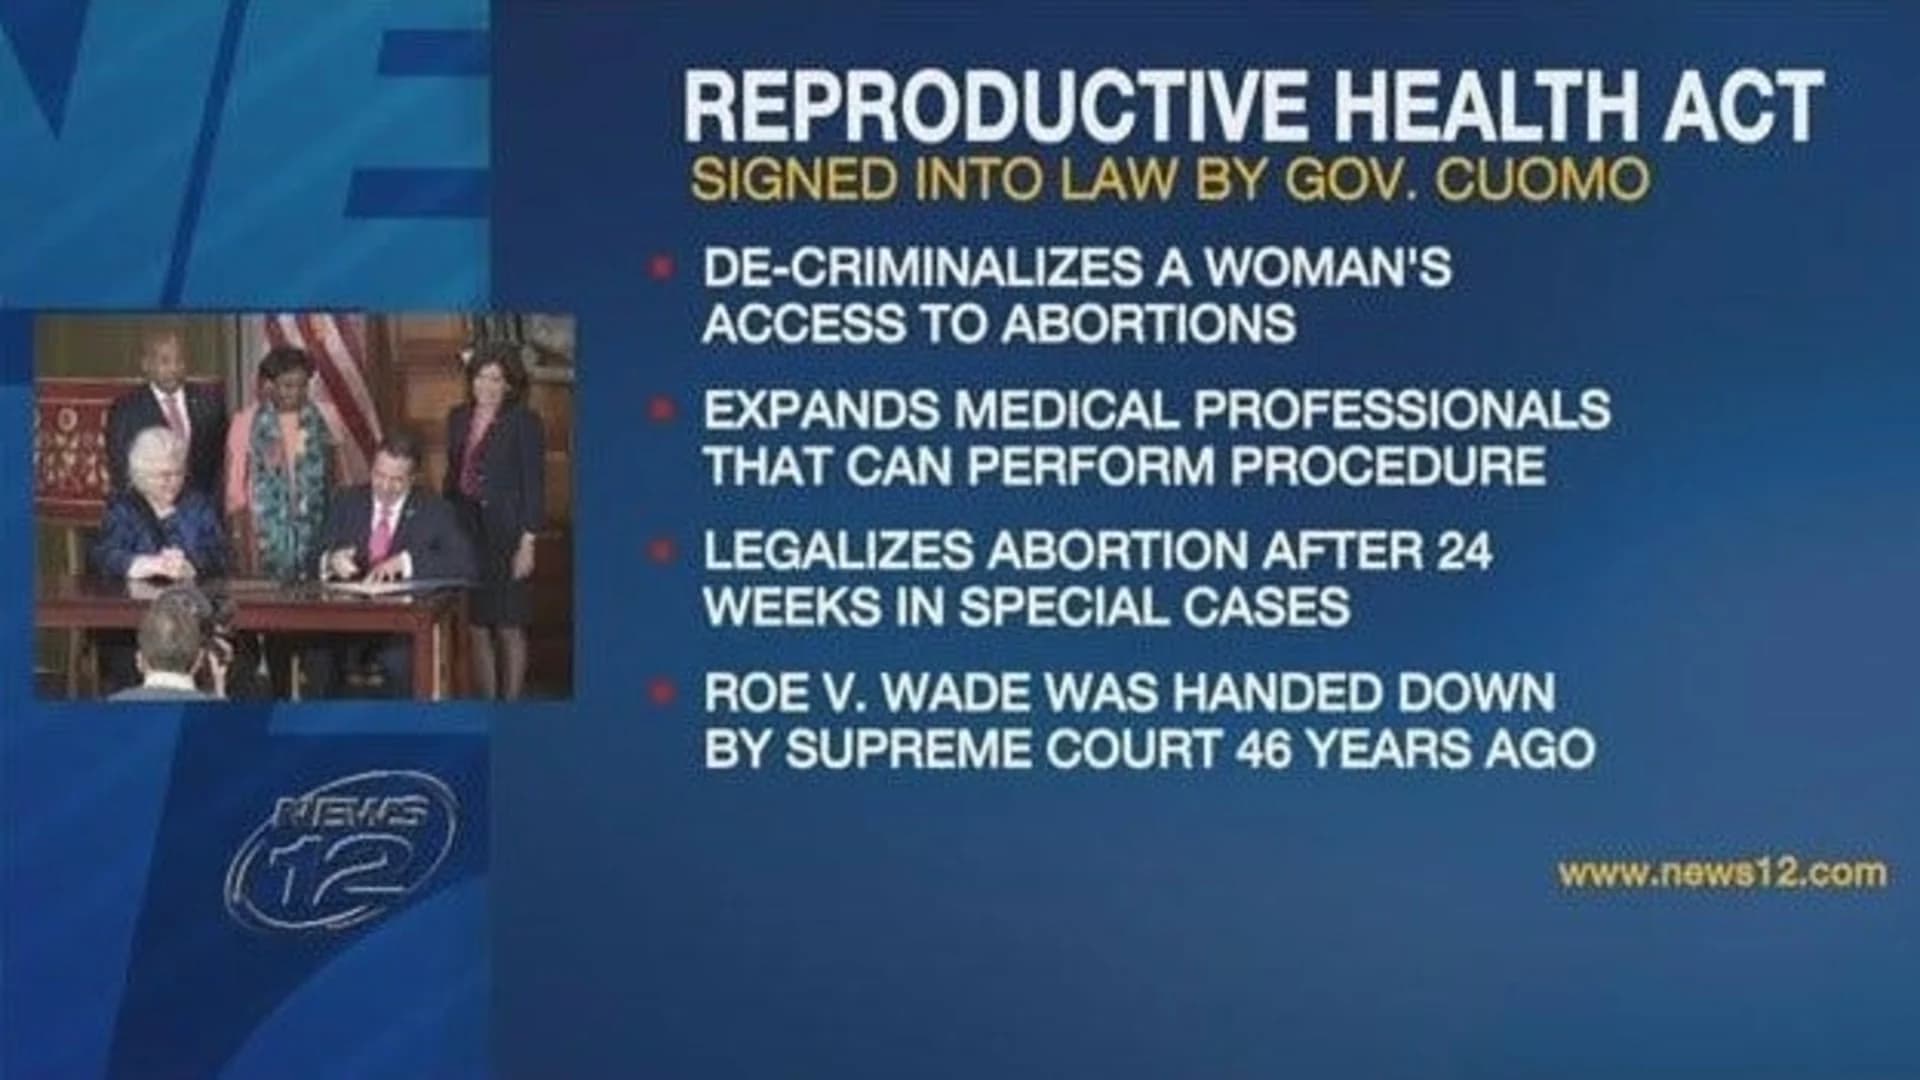 New York enacts new protections for abortion rights